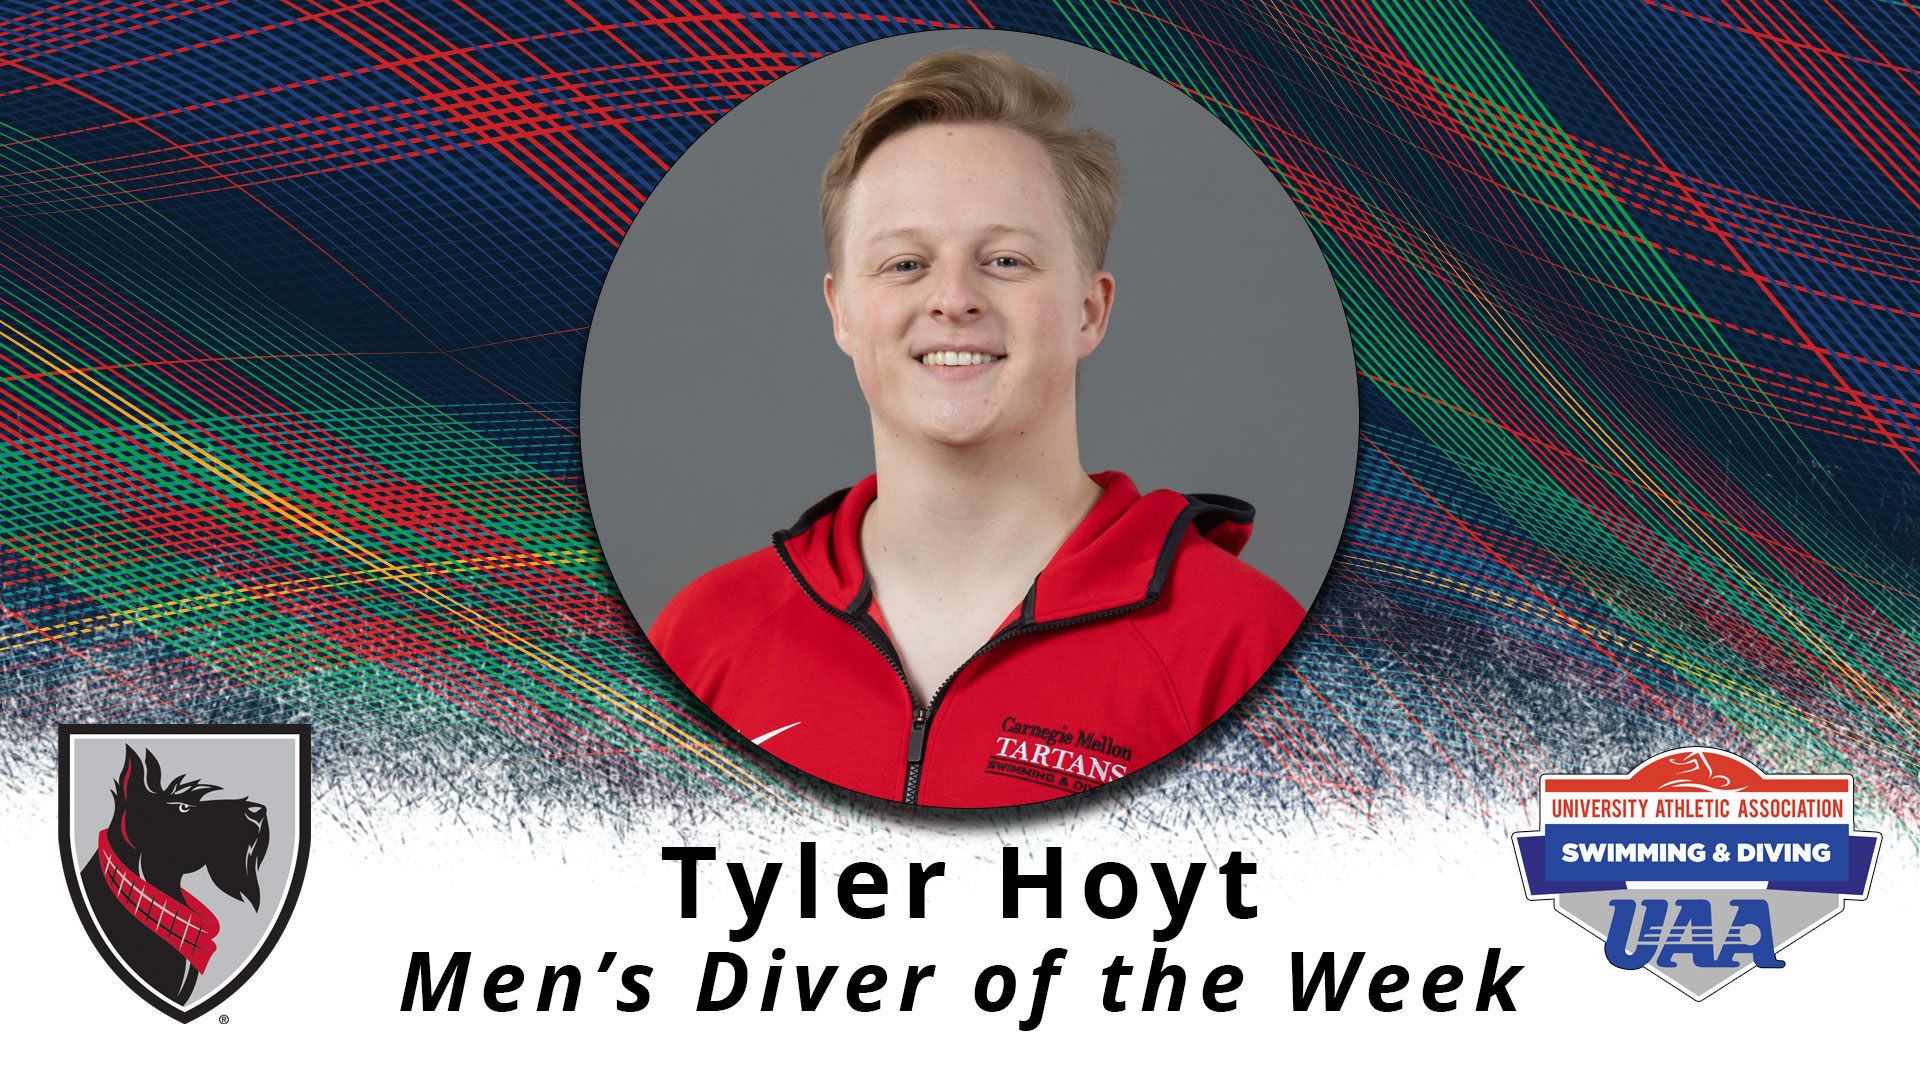 portrait of a male framed in a circle with text readying Tyler Hoyt Men's Diver of the Week